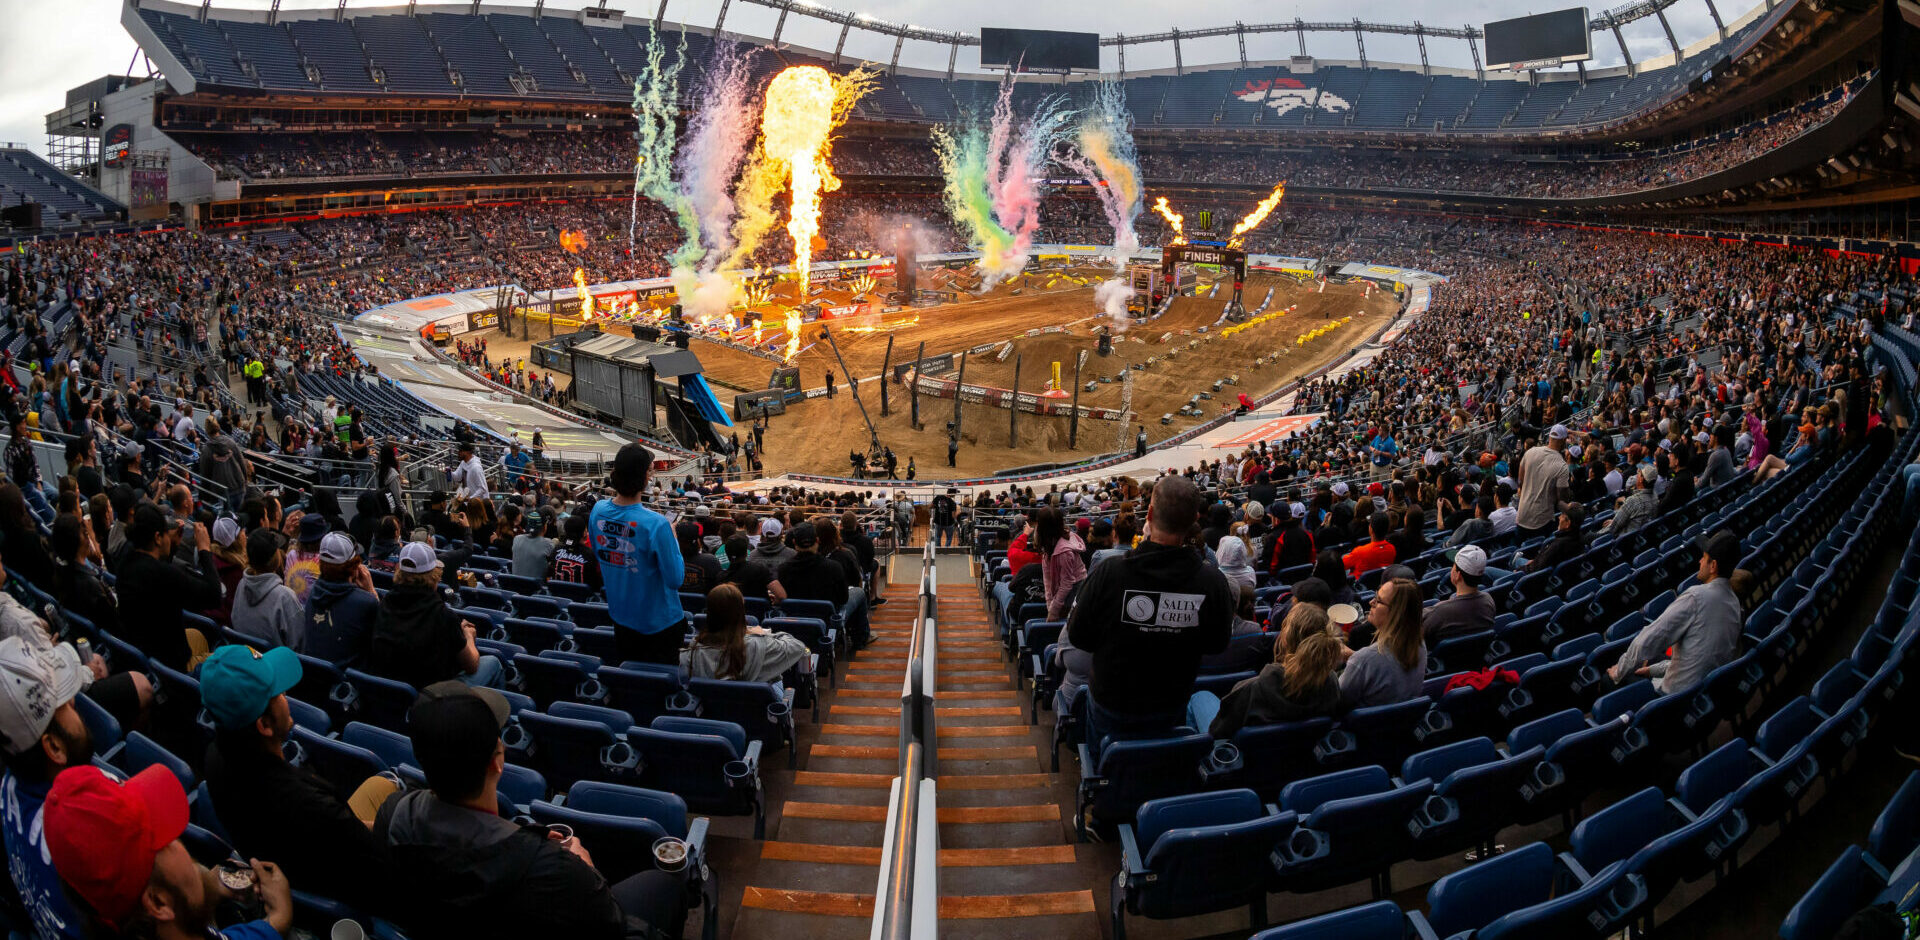 The 51,691 fans packed into Empower Field at Mile High witnessed one of the most dramatic Supercross championship reversals the sport has ever seen. Photo courtesy Feld Motor Sports, Inc.